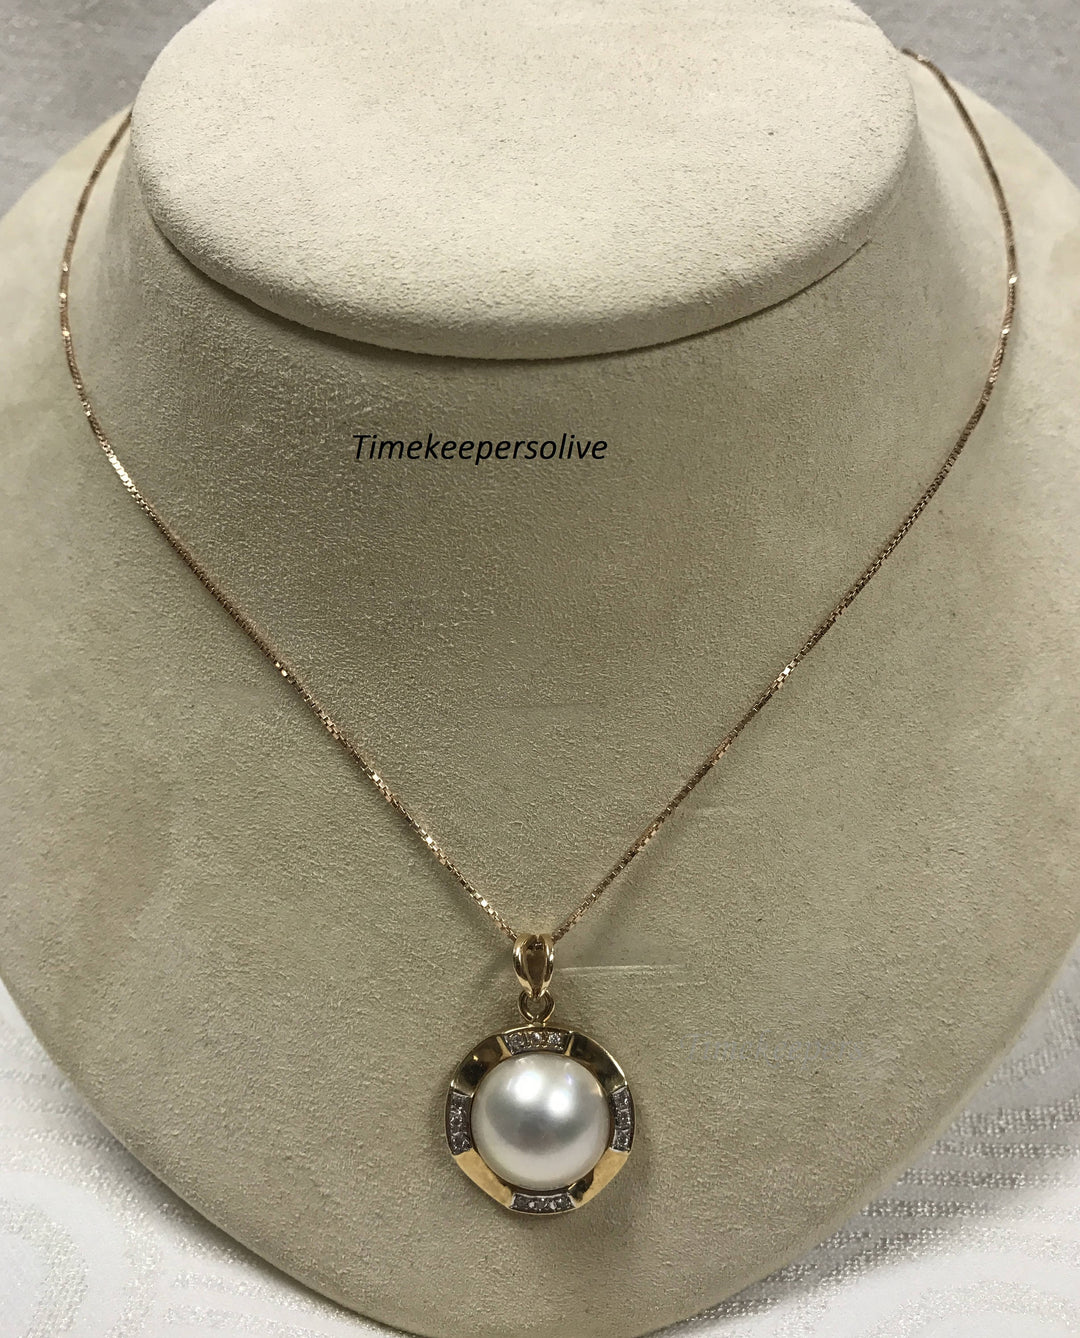 b121 Beautiful Luster Half Pearl Chain Necklace Pendant with Diamonds in 14k; 10K Gold